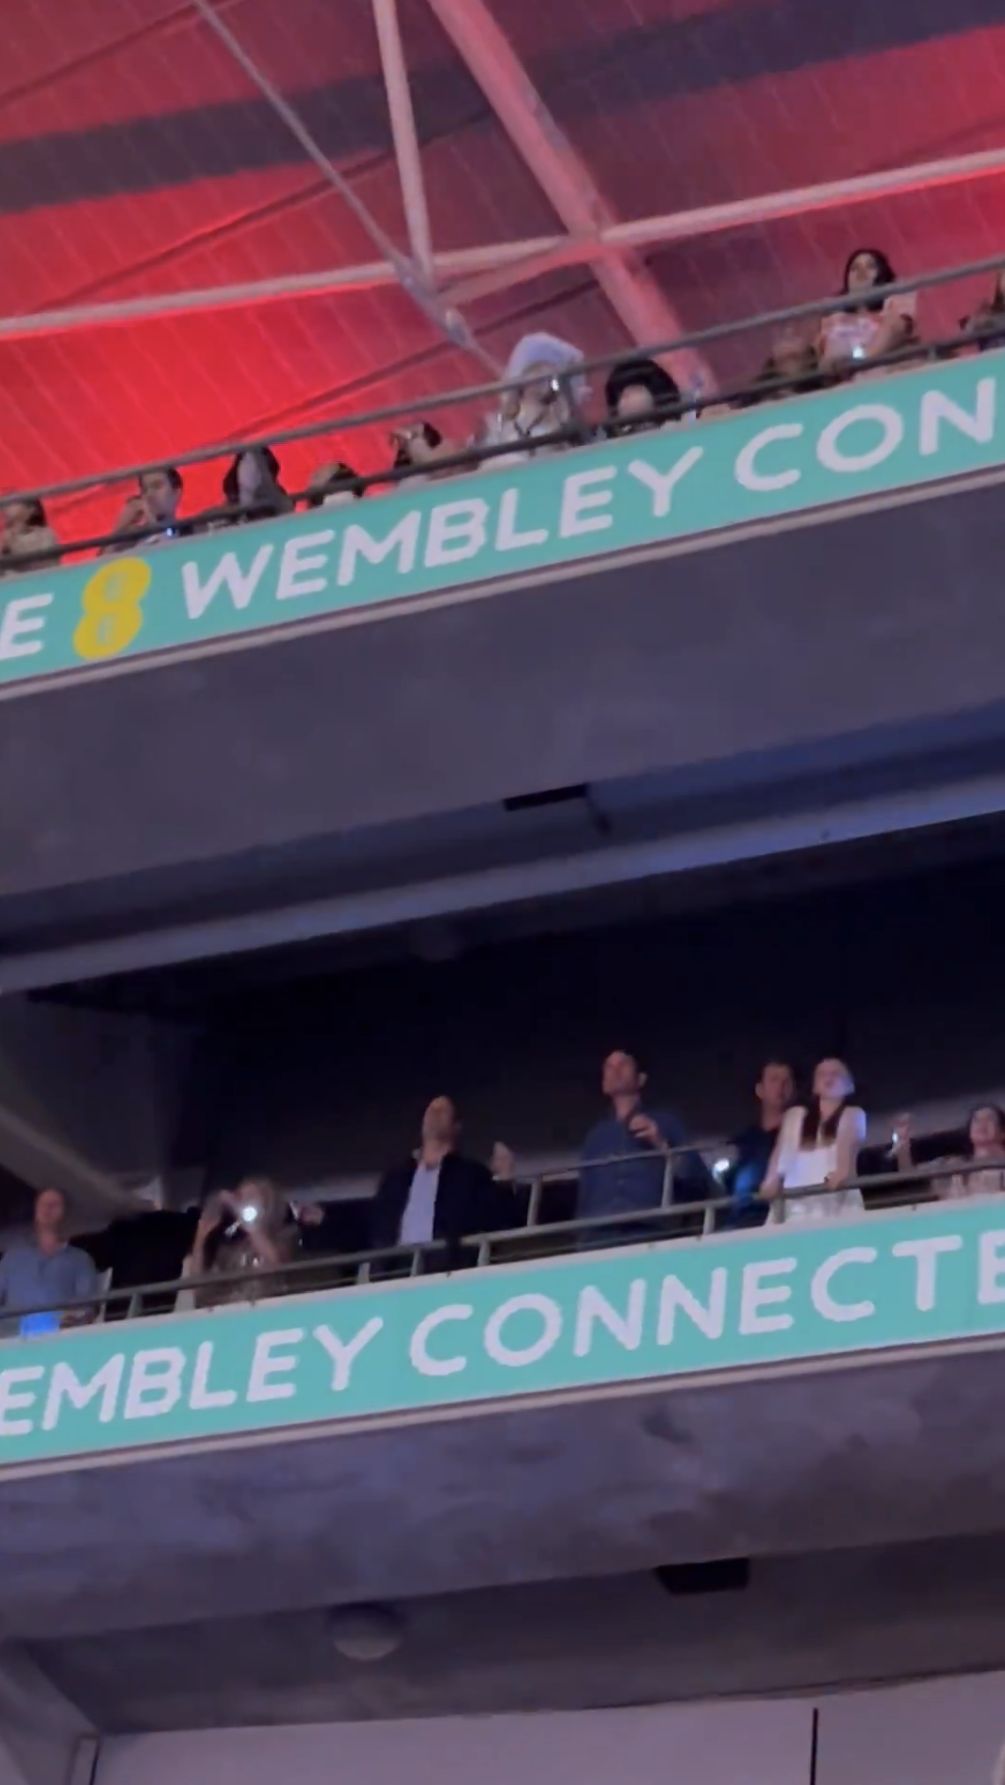 Prince William at a Taylor Swift concert